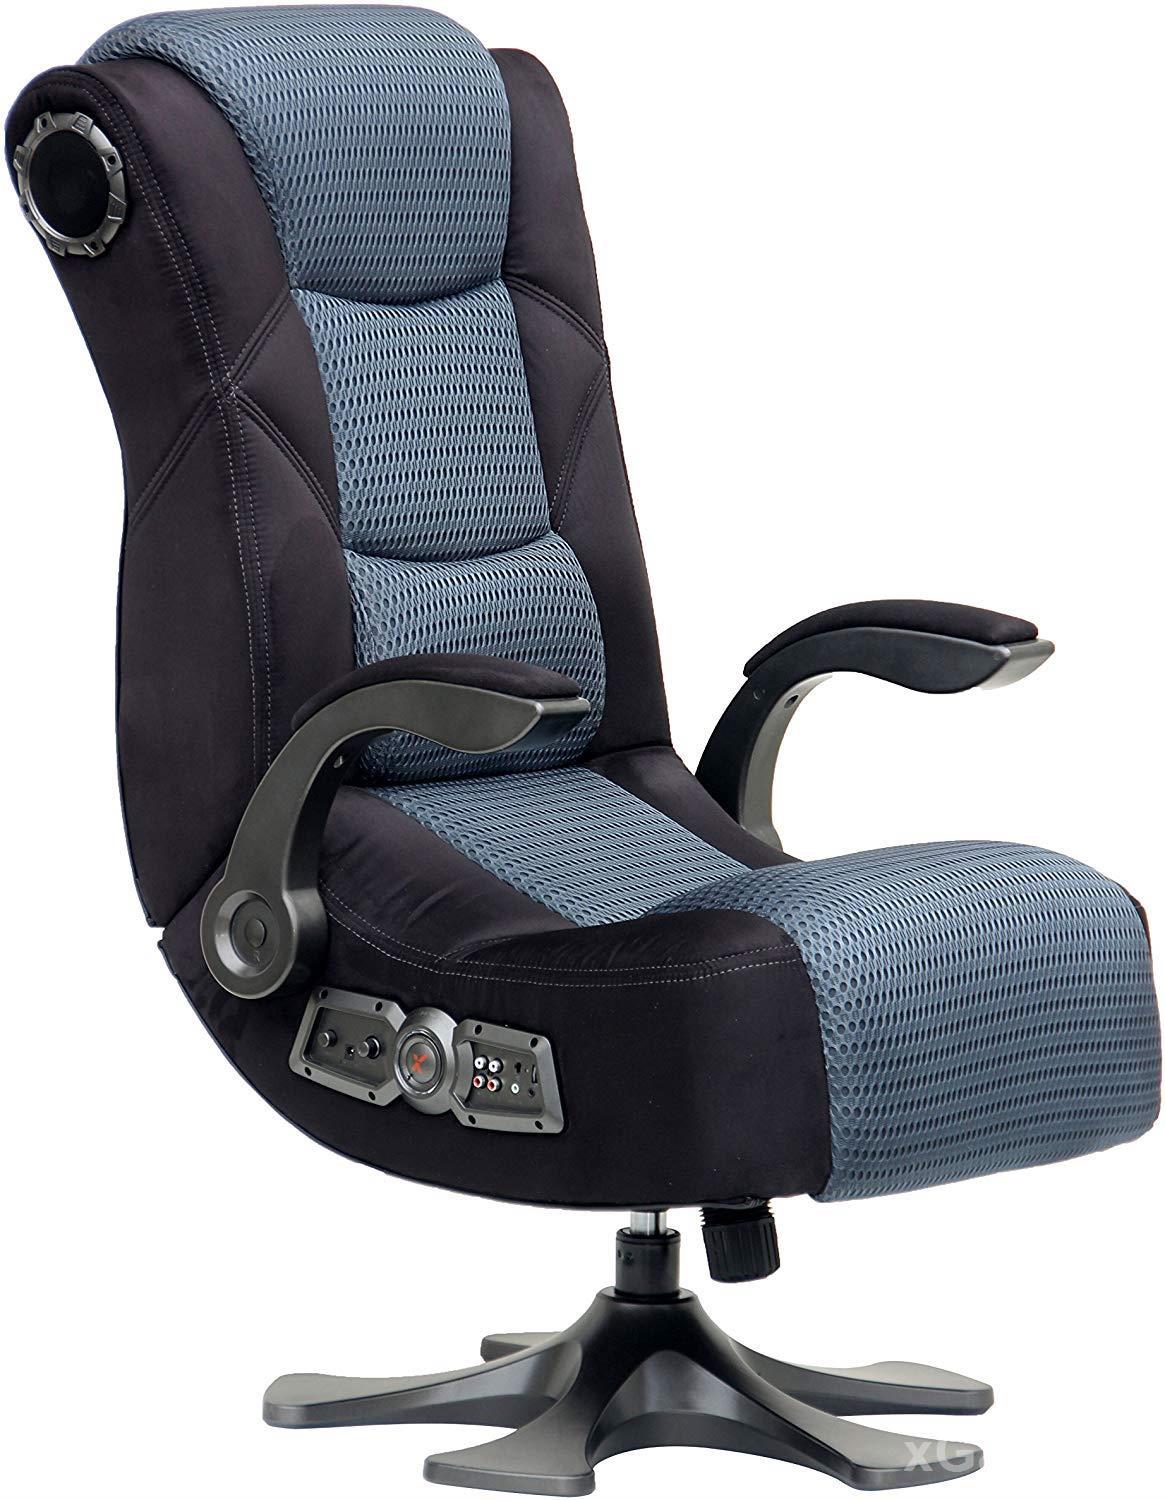 X Rocker Deluxe Mesh 2.1 Sound Wireless Video Gaming Chair